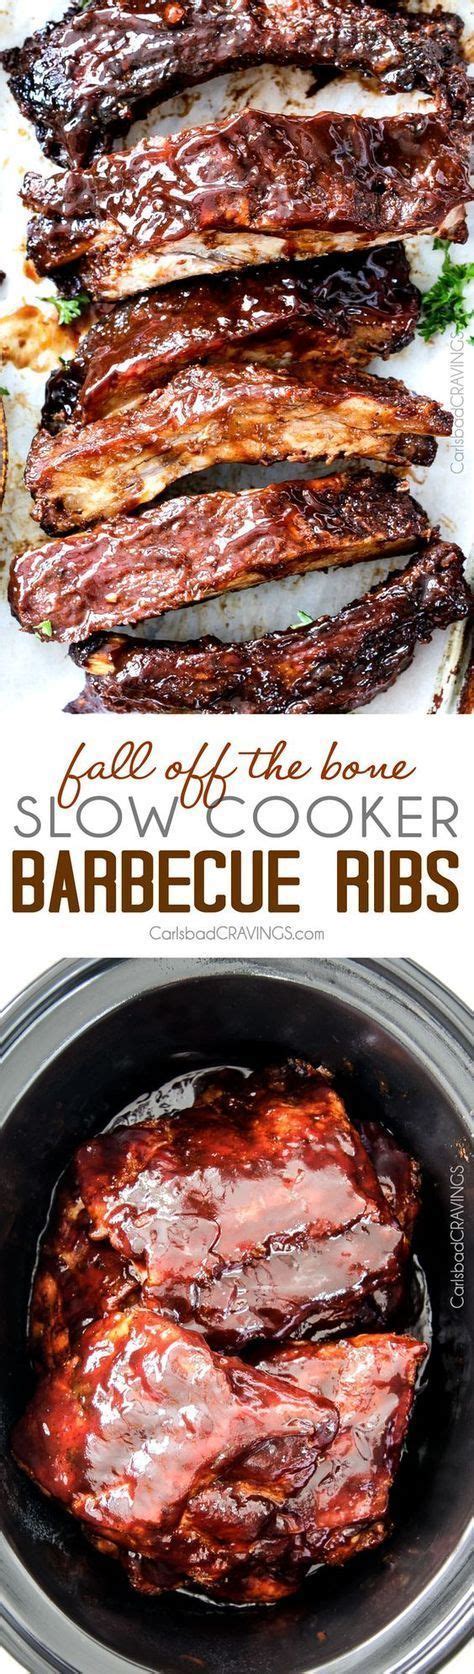 Submitted by reader kari m. Crock Pot Beef Roast - Mushroom Sauce | Recipe (With images) | Slow cooker barbecue ribs ...